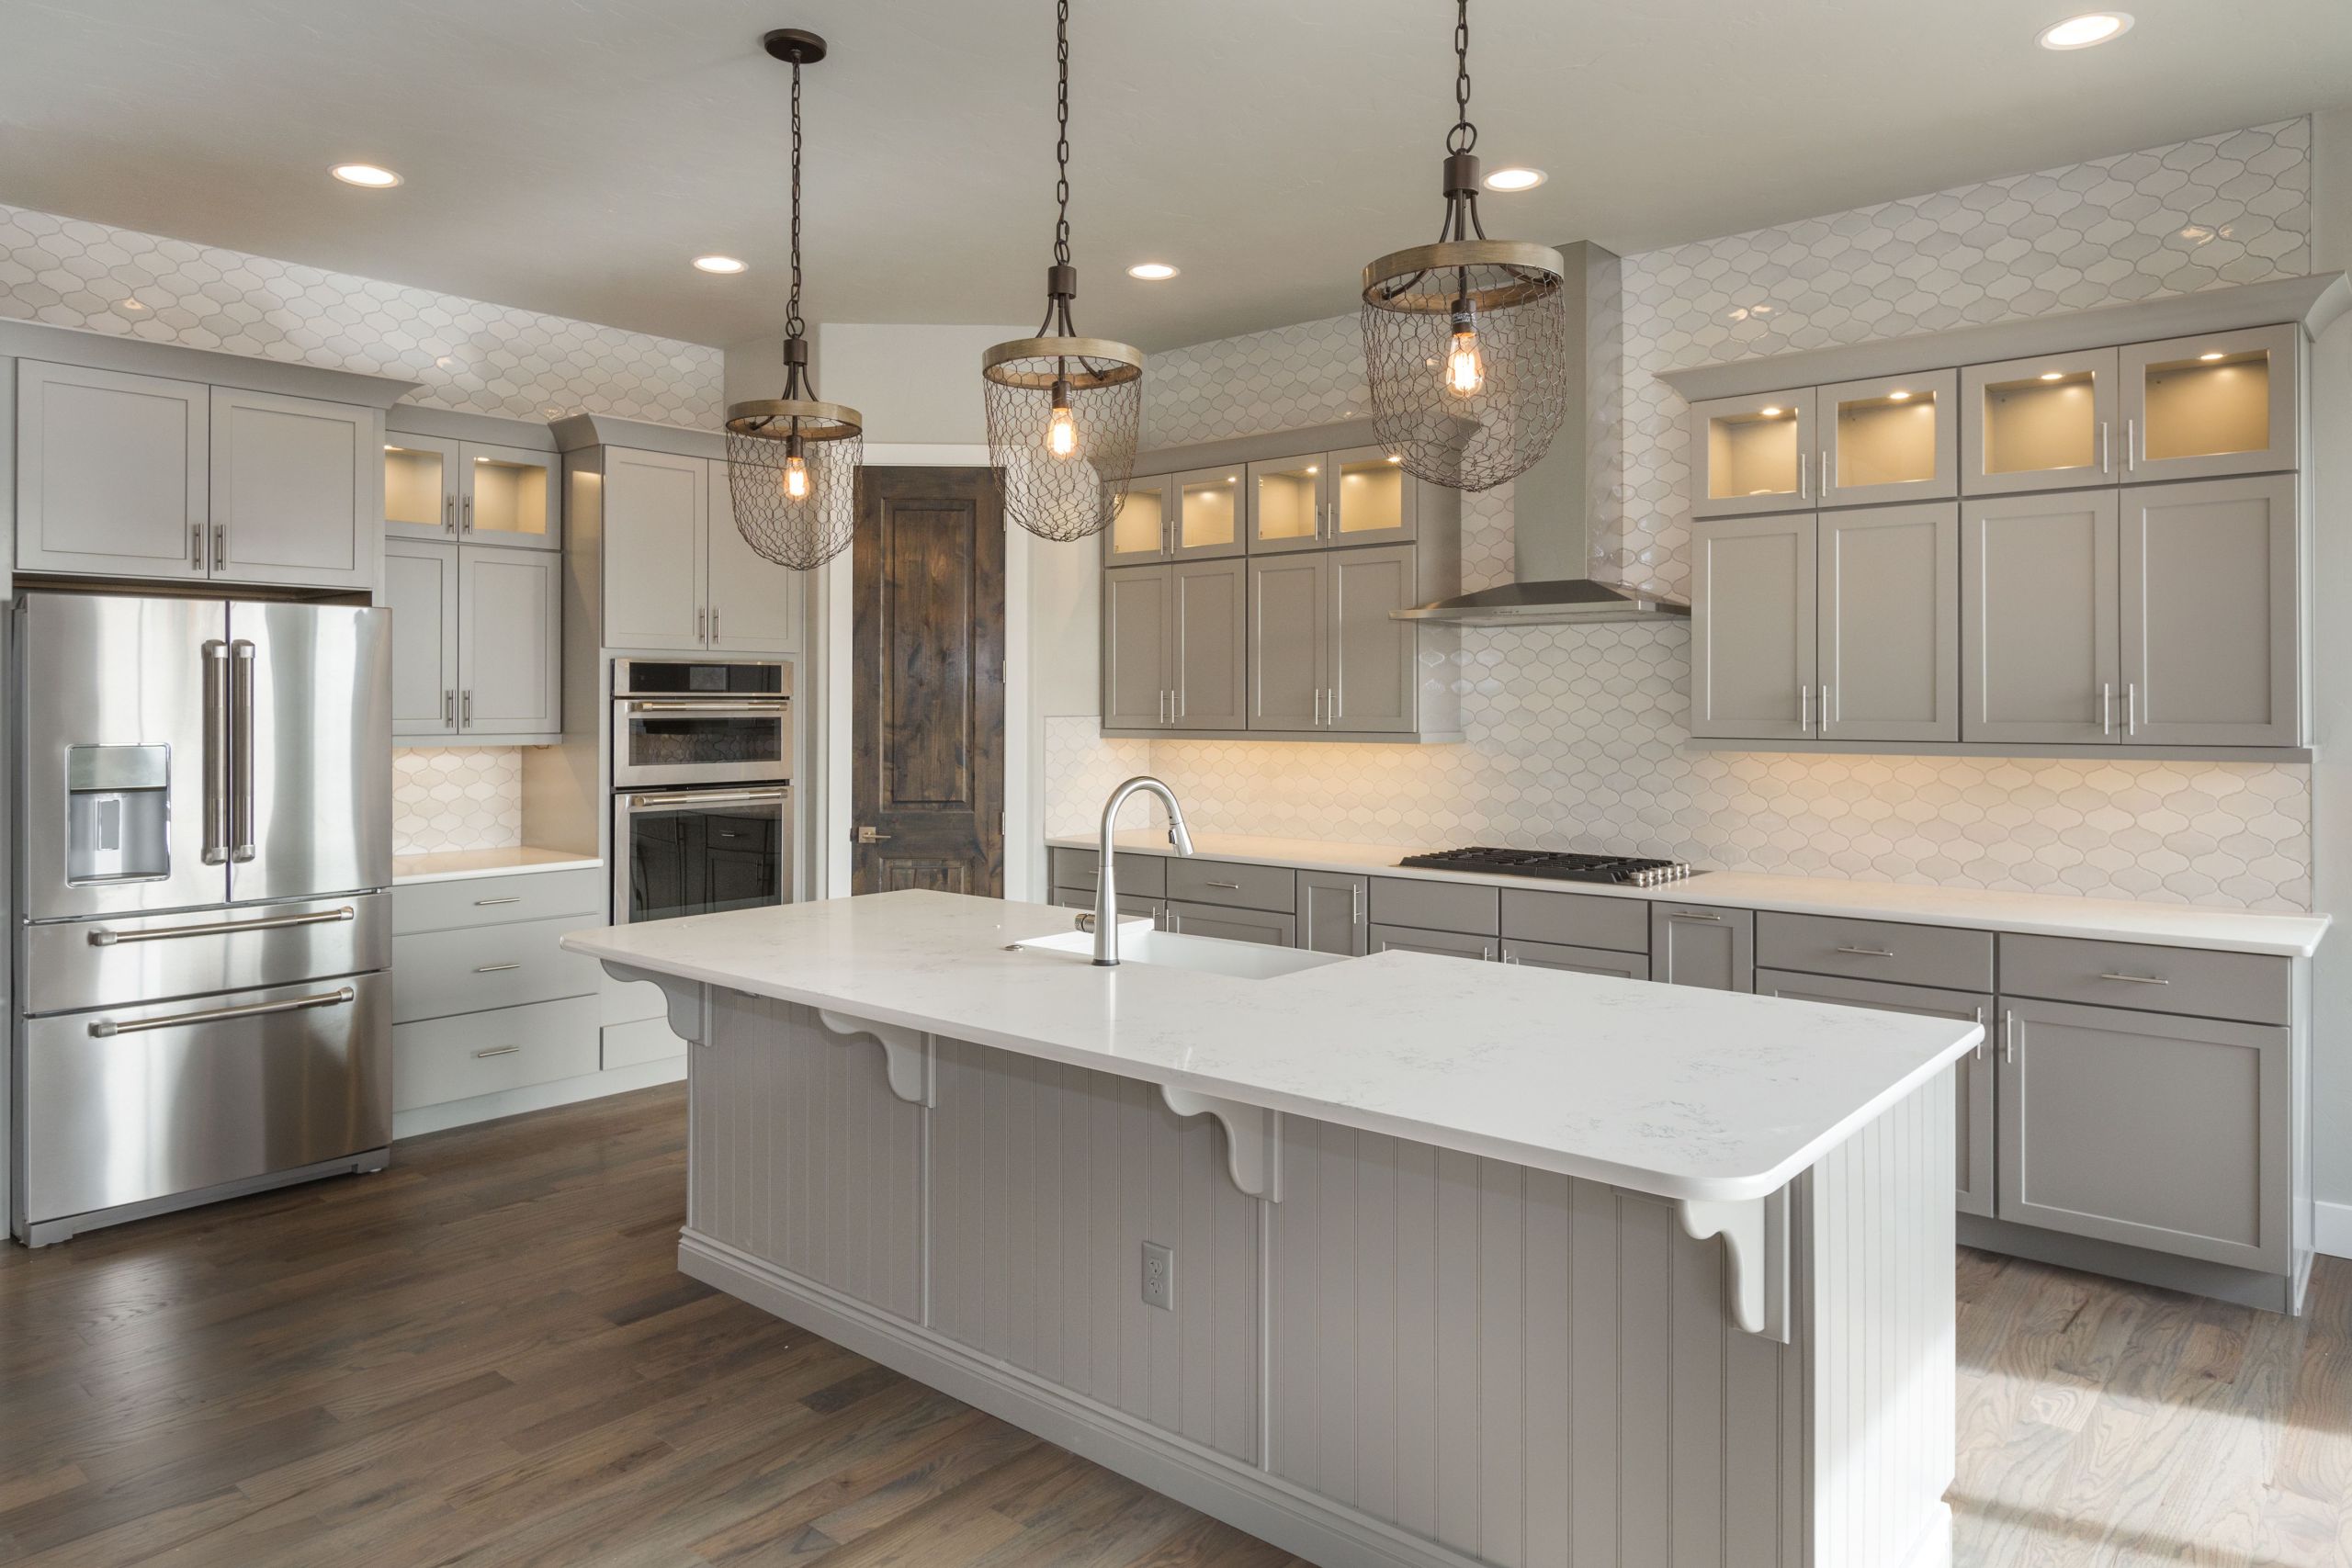 Best Kitchen Remodels
 The Top Kitchen Remodeling Tips for a Stellar Kitchen